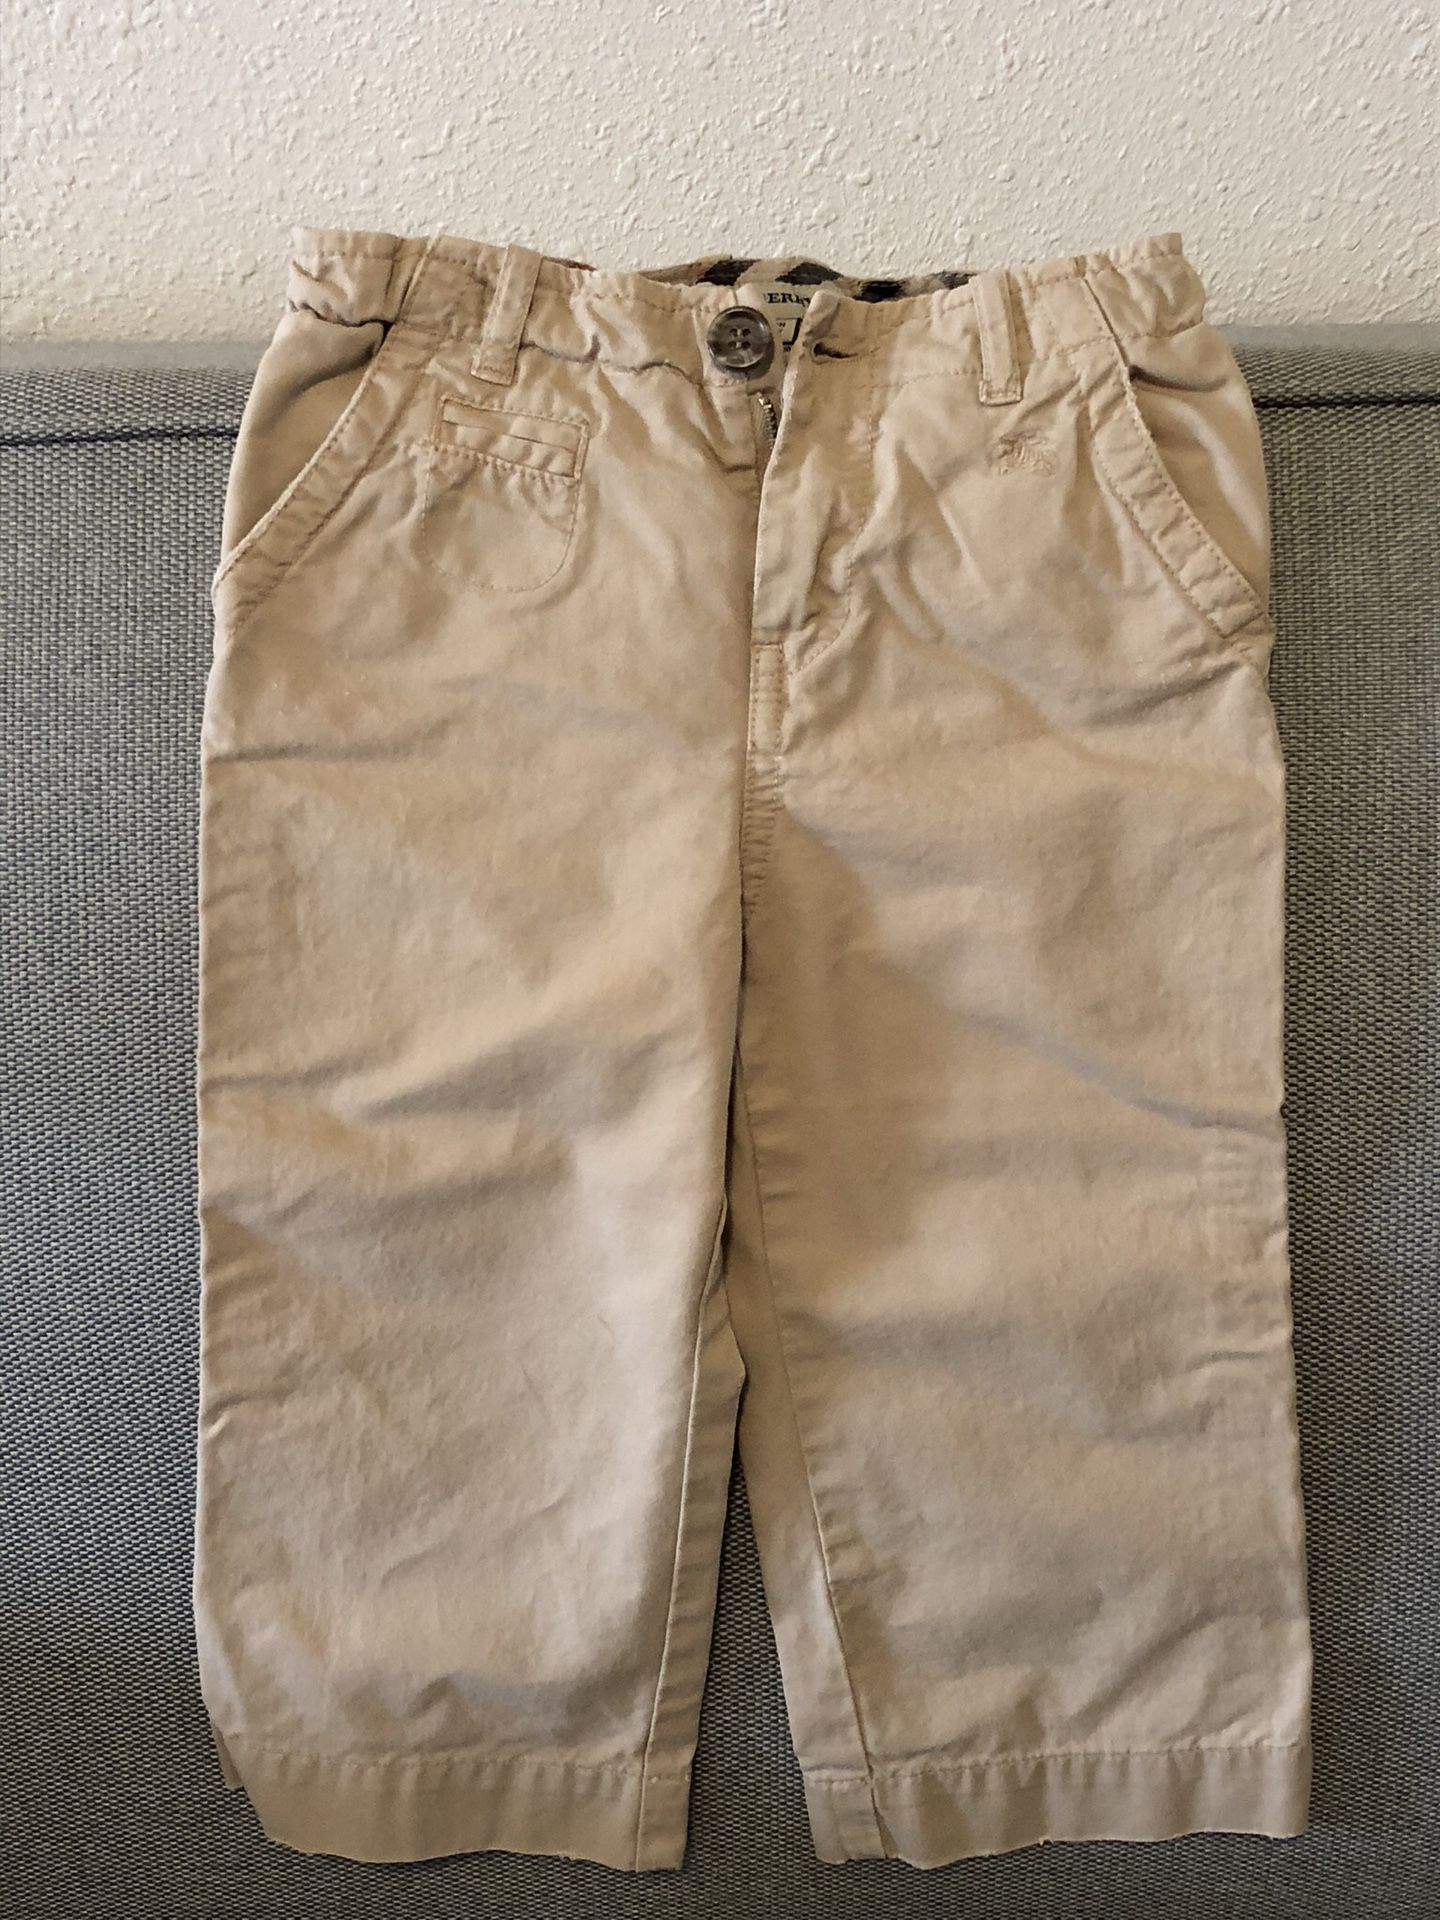 tale Recollection Supermarked Burberry Pants for Sale in West Covina, CA - OfferUp